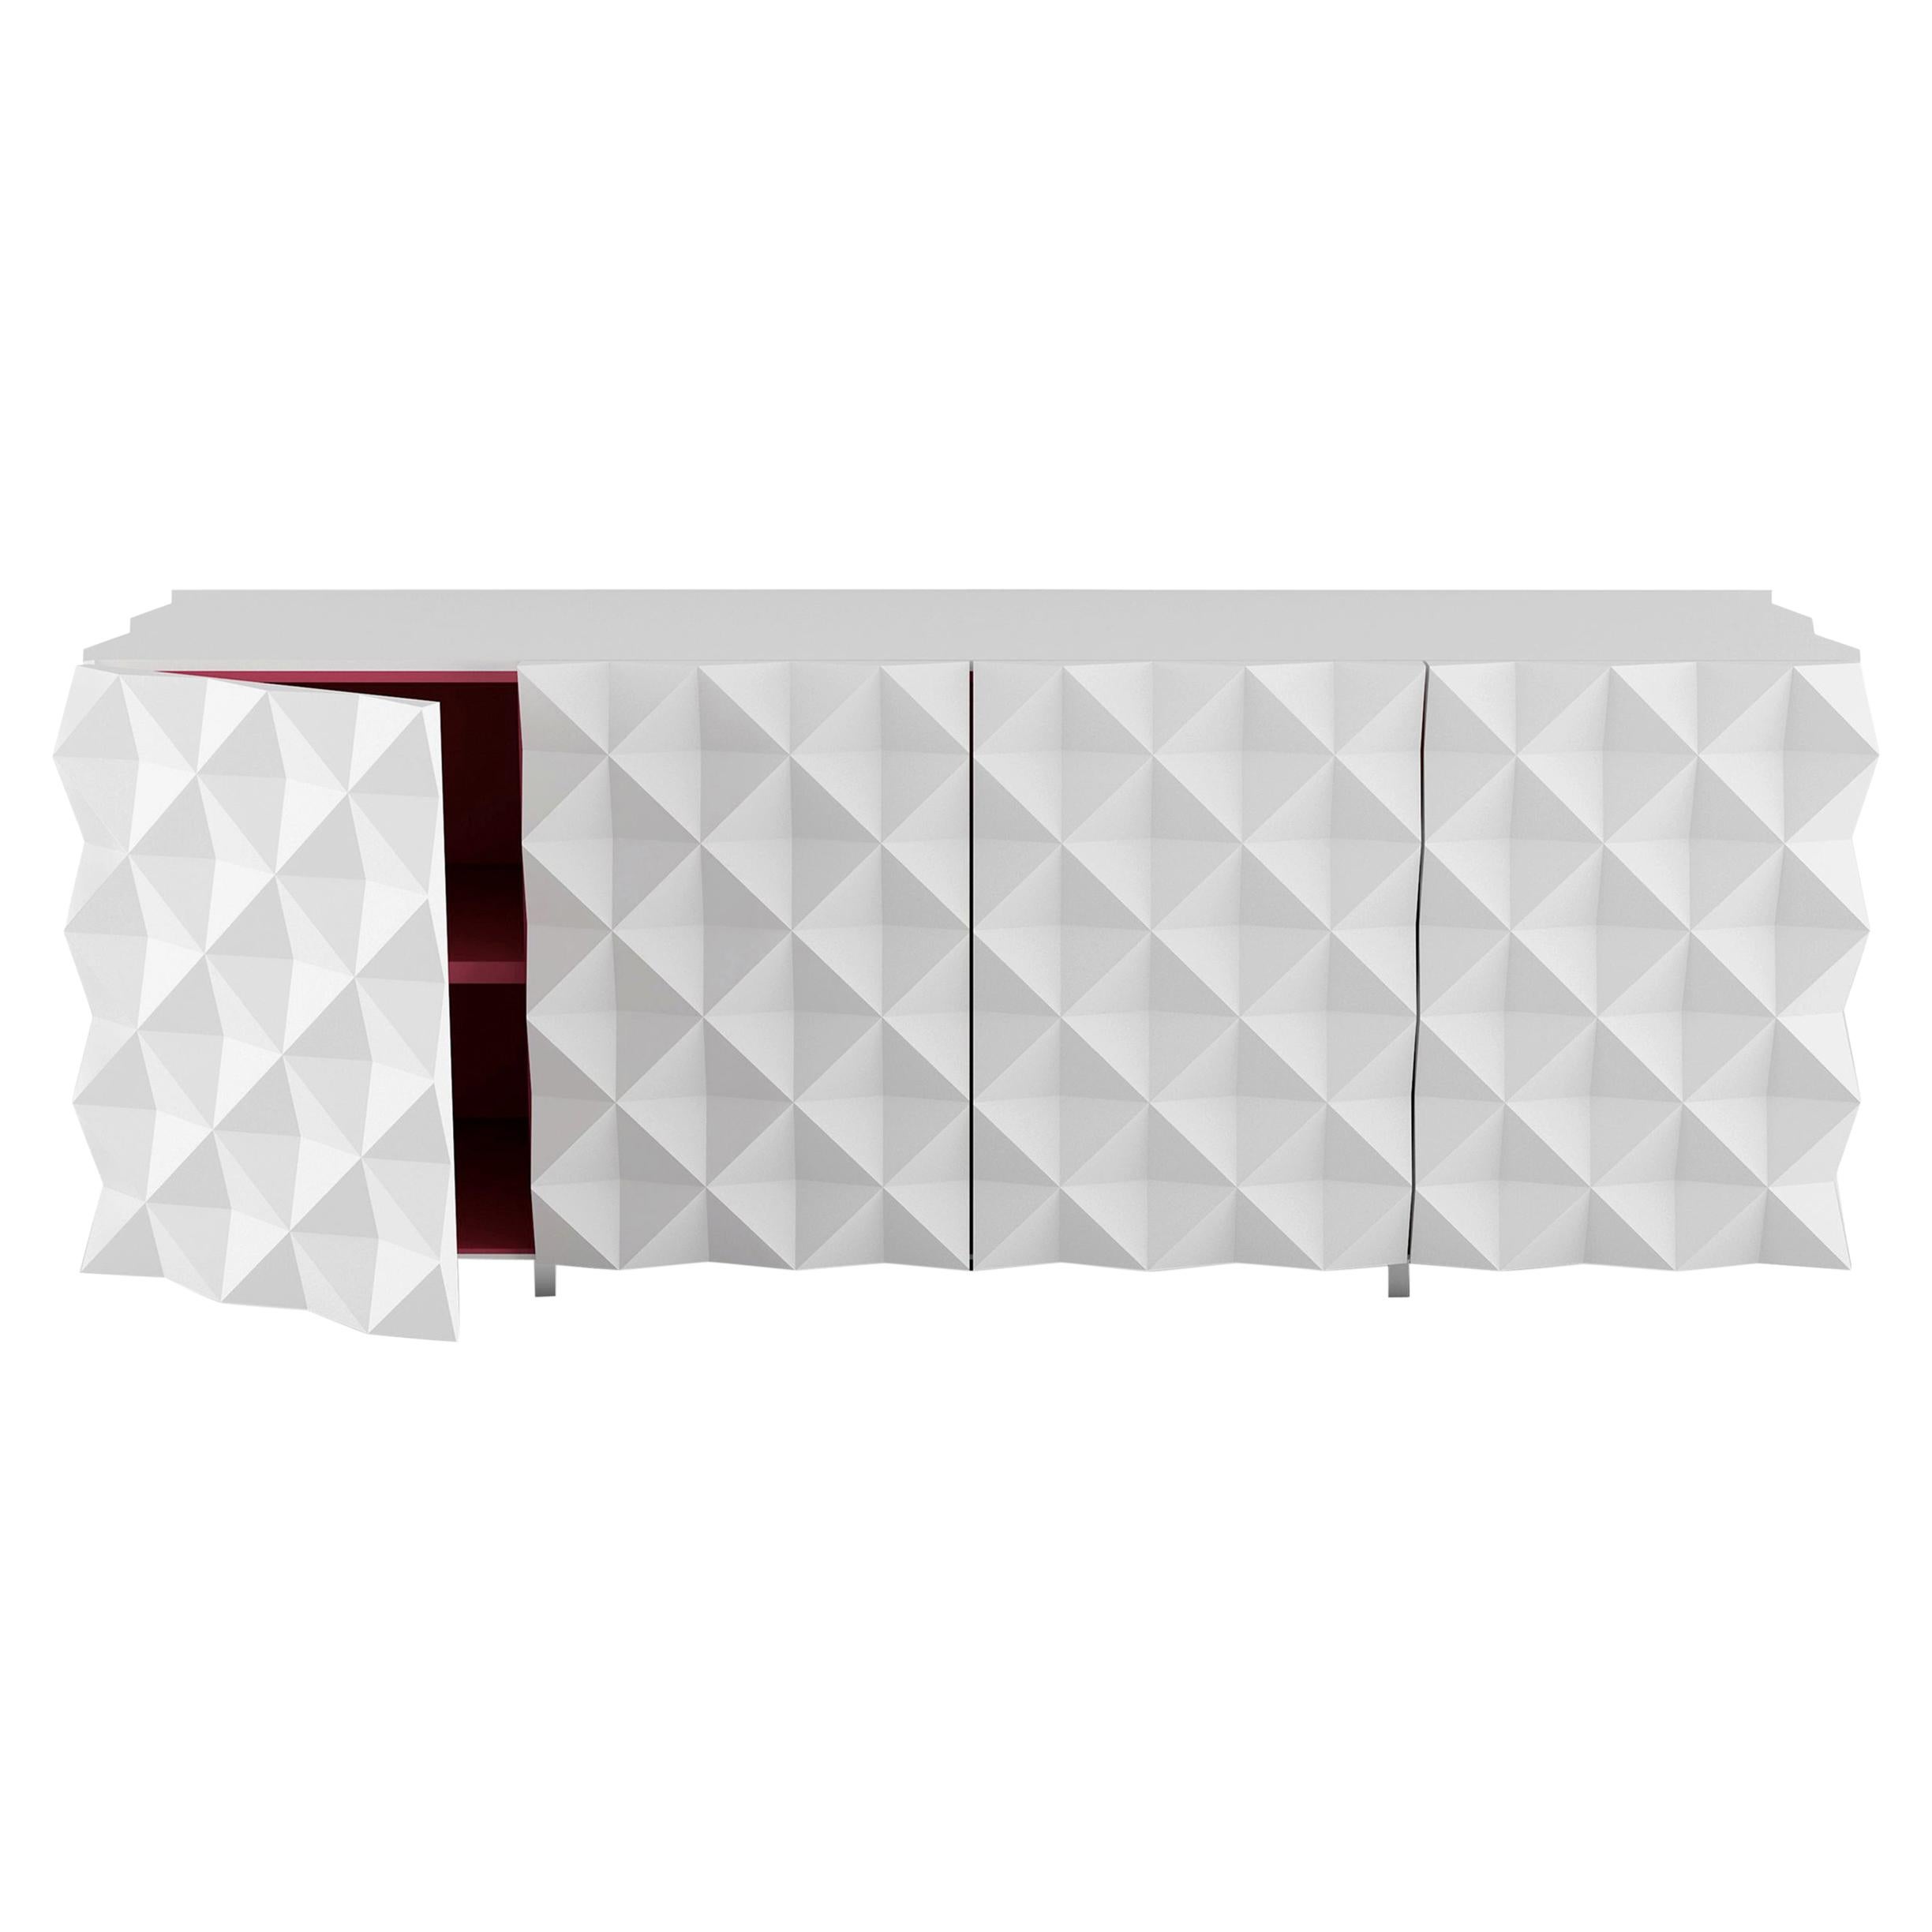 Rocky Sideboard, Credenza, Console in White by Joel Escalona im Angebot